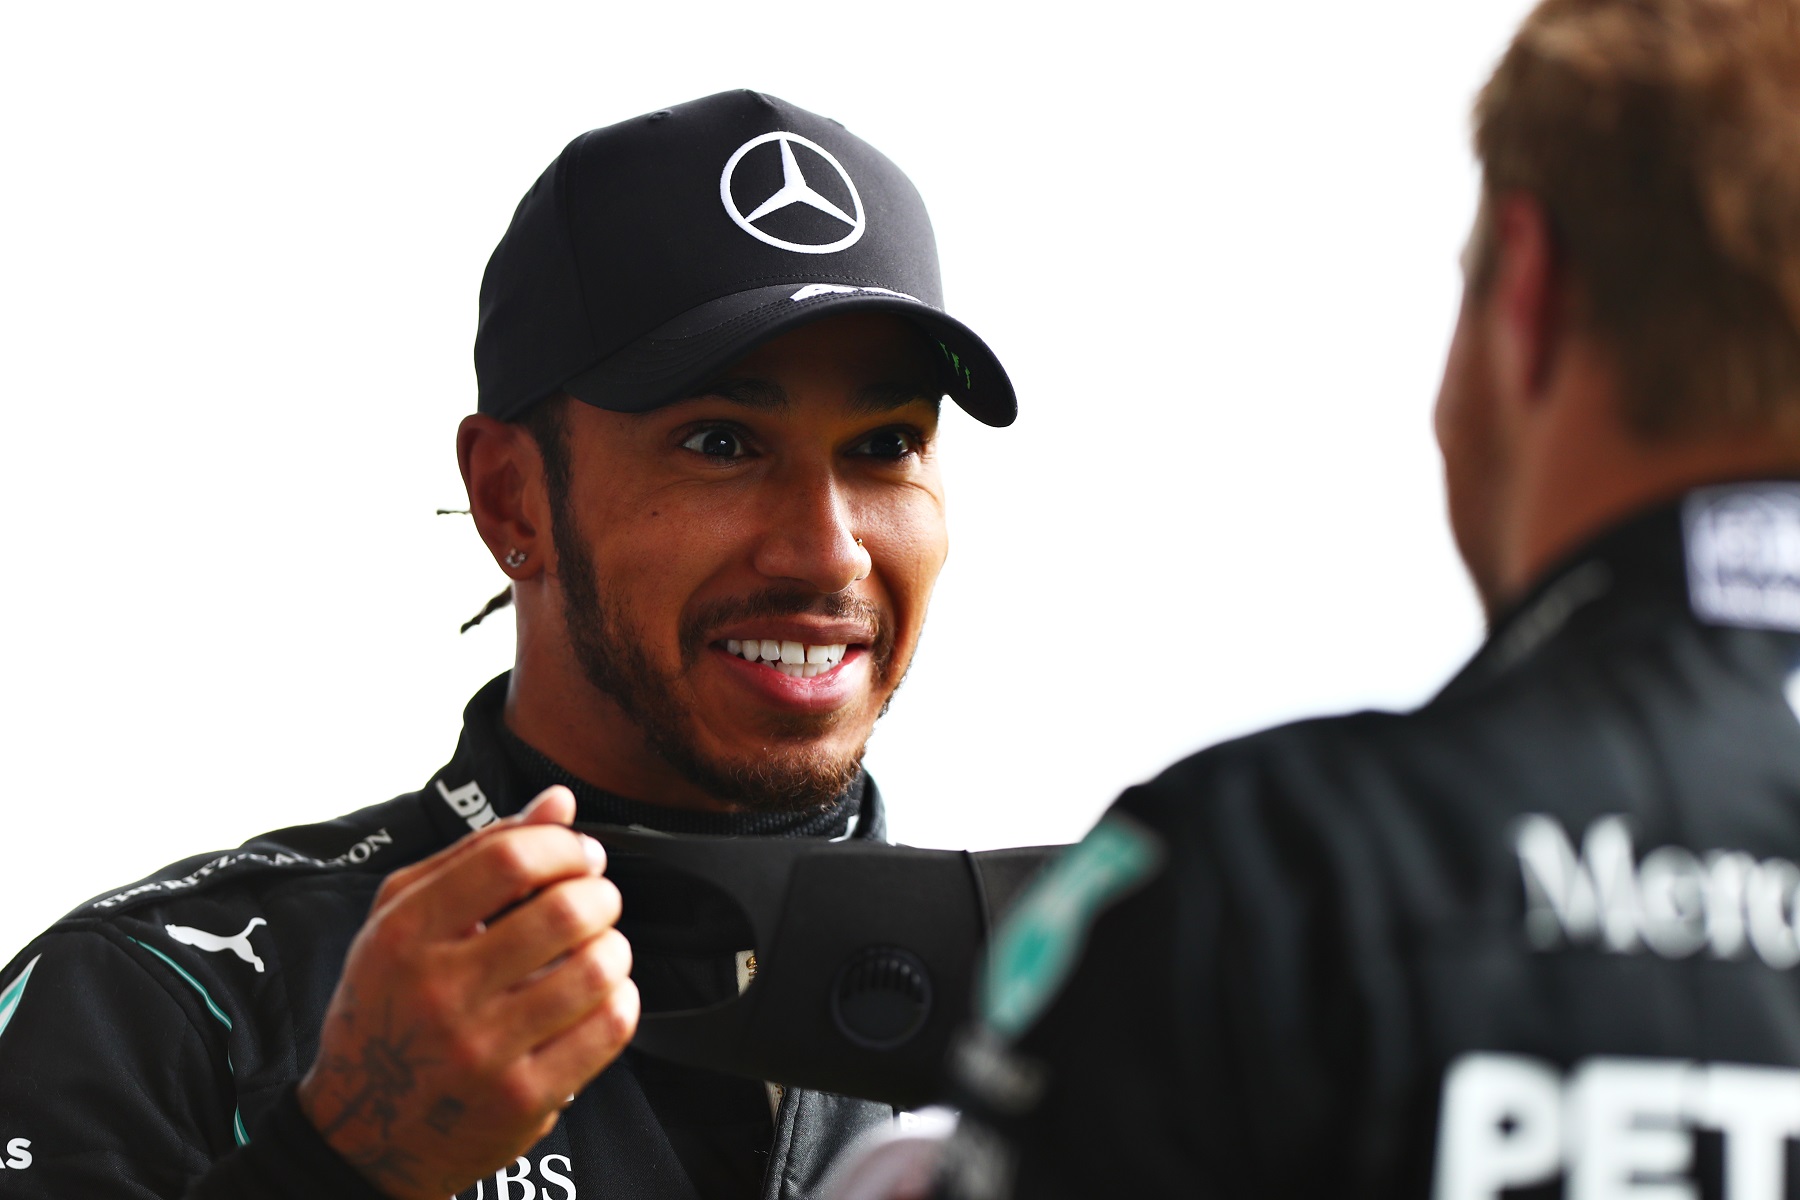 Did Lewis Hamilton Just Signal He’s Bored With Dominating Formula One Racing?